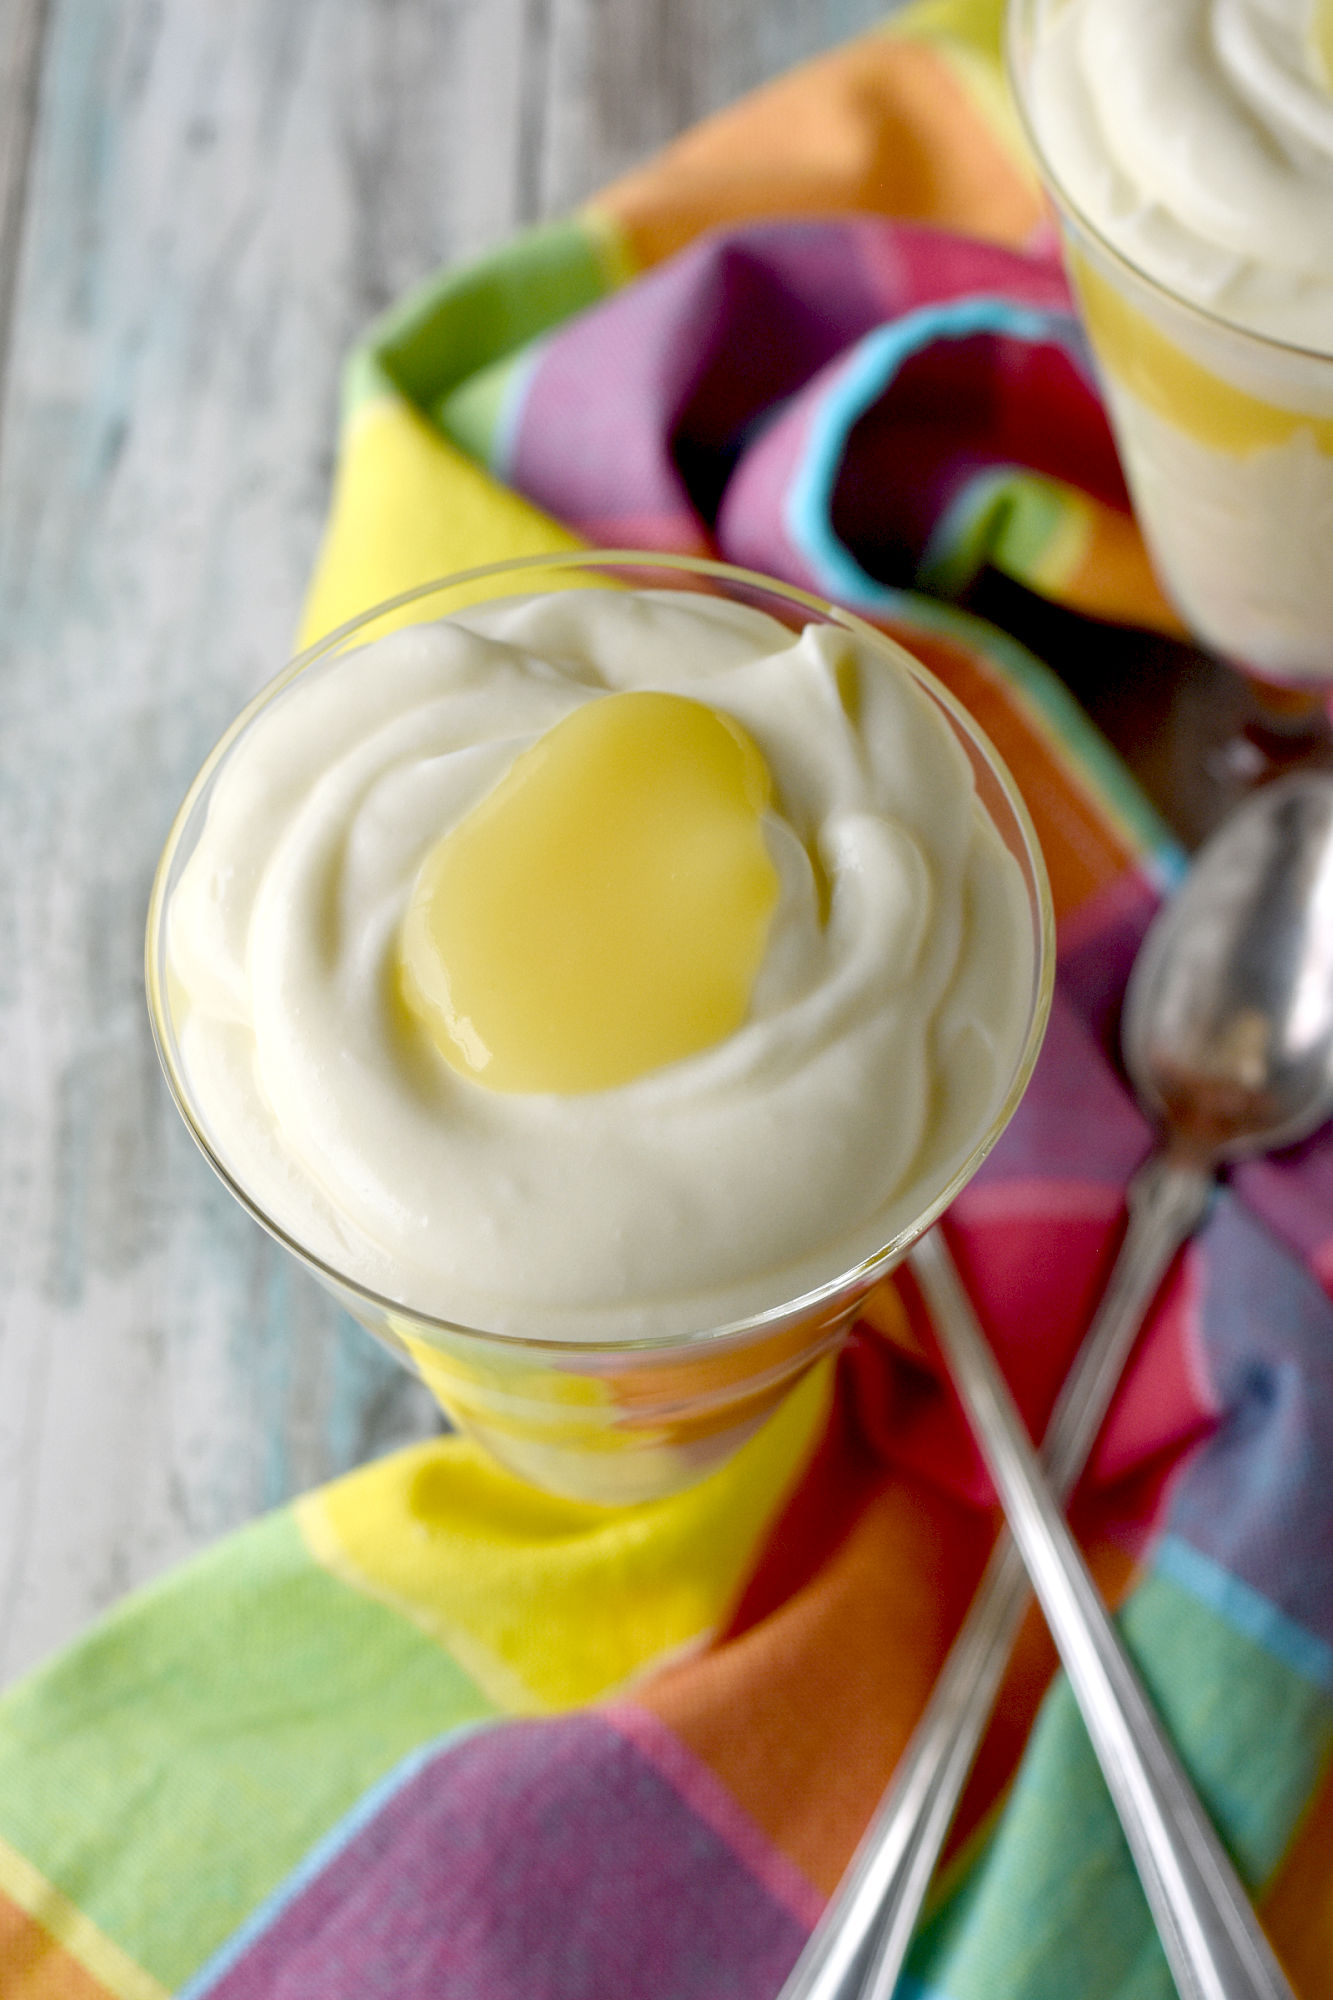 Key Lime Curd Mousse is creamy with a sweet and tangy flavor. I used leftover key lime curd, but you can easily make your own in the microwave. #BrunchWeek #keylimes #microwavecurd #dessert #easymousse
